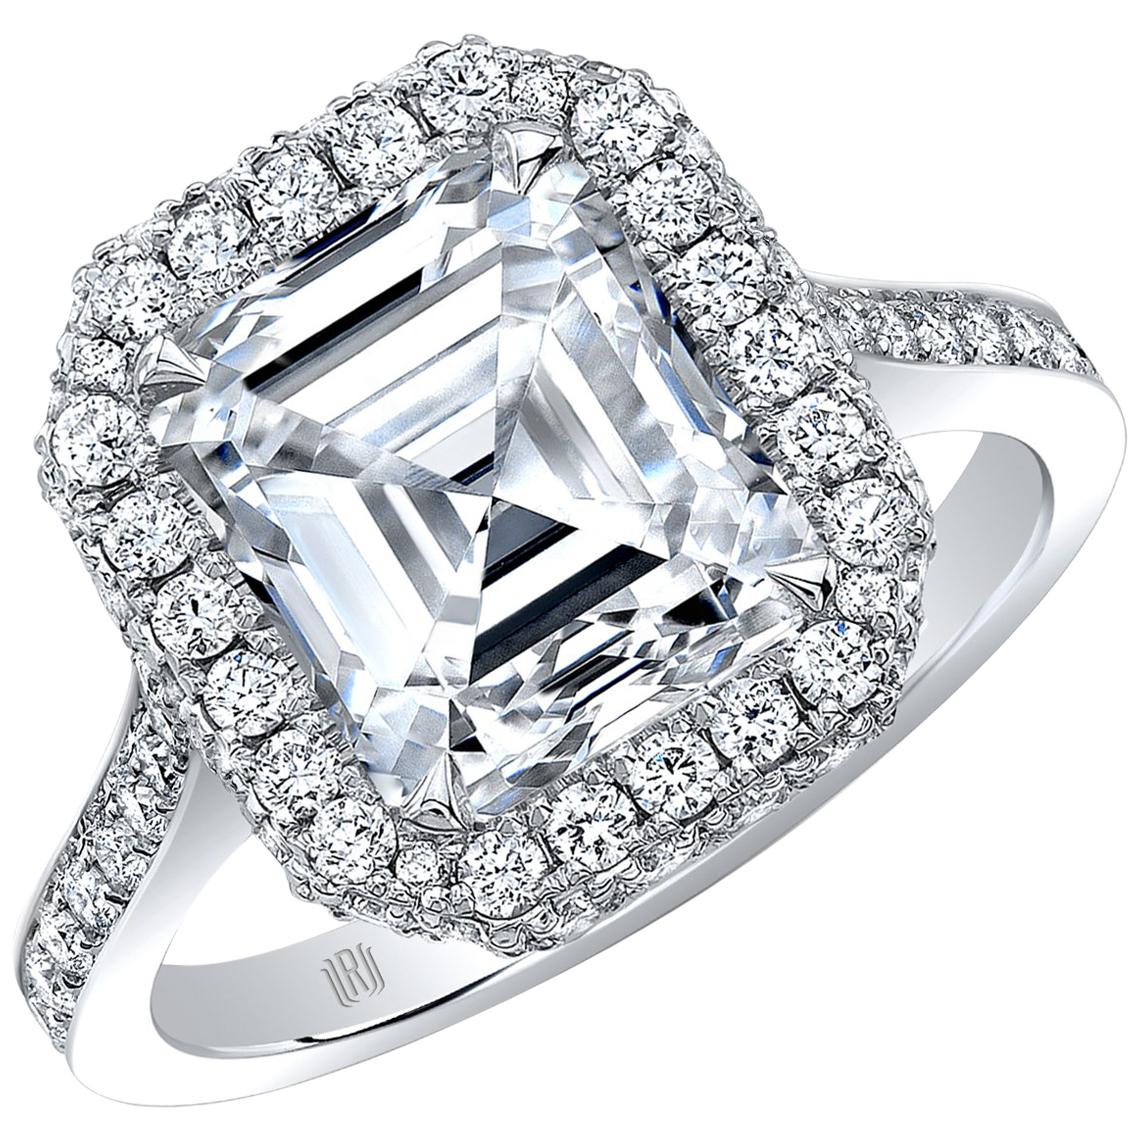 GIA Certified 2.74 Carat E/SI1 Emerald Cut Diamond Halo Engagement Ring For Sale